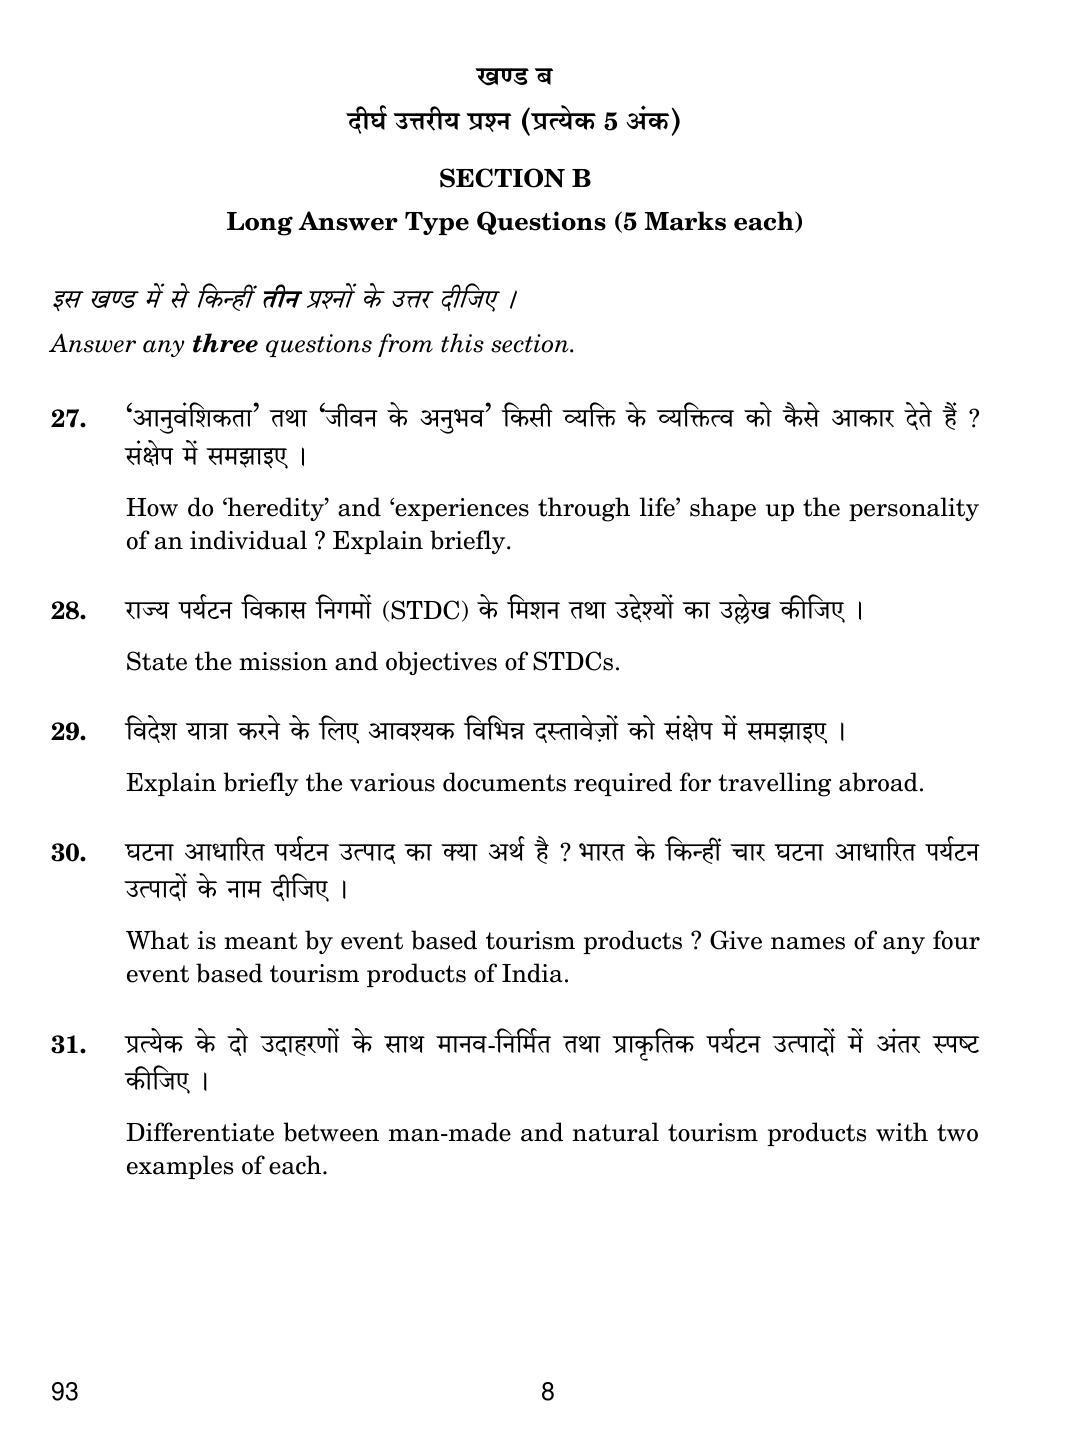 CBSE Class 10 93 INTRODUCTION TO TOURISM 2019 Question Paper - Page 8